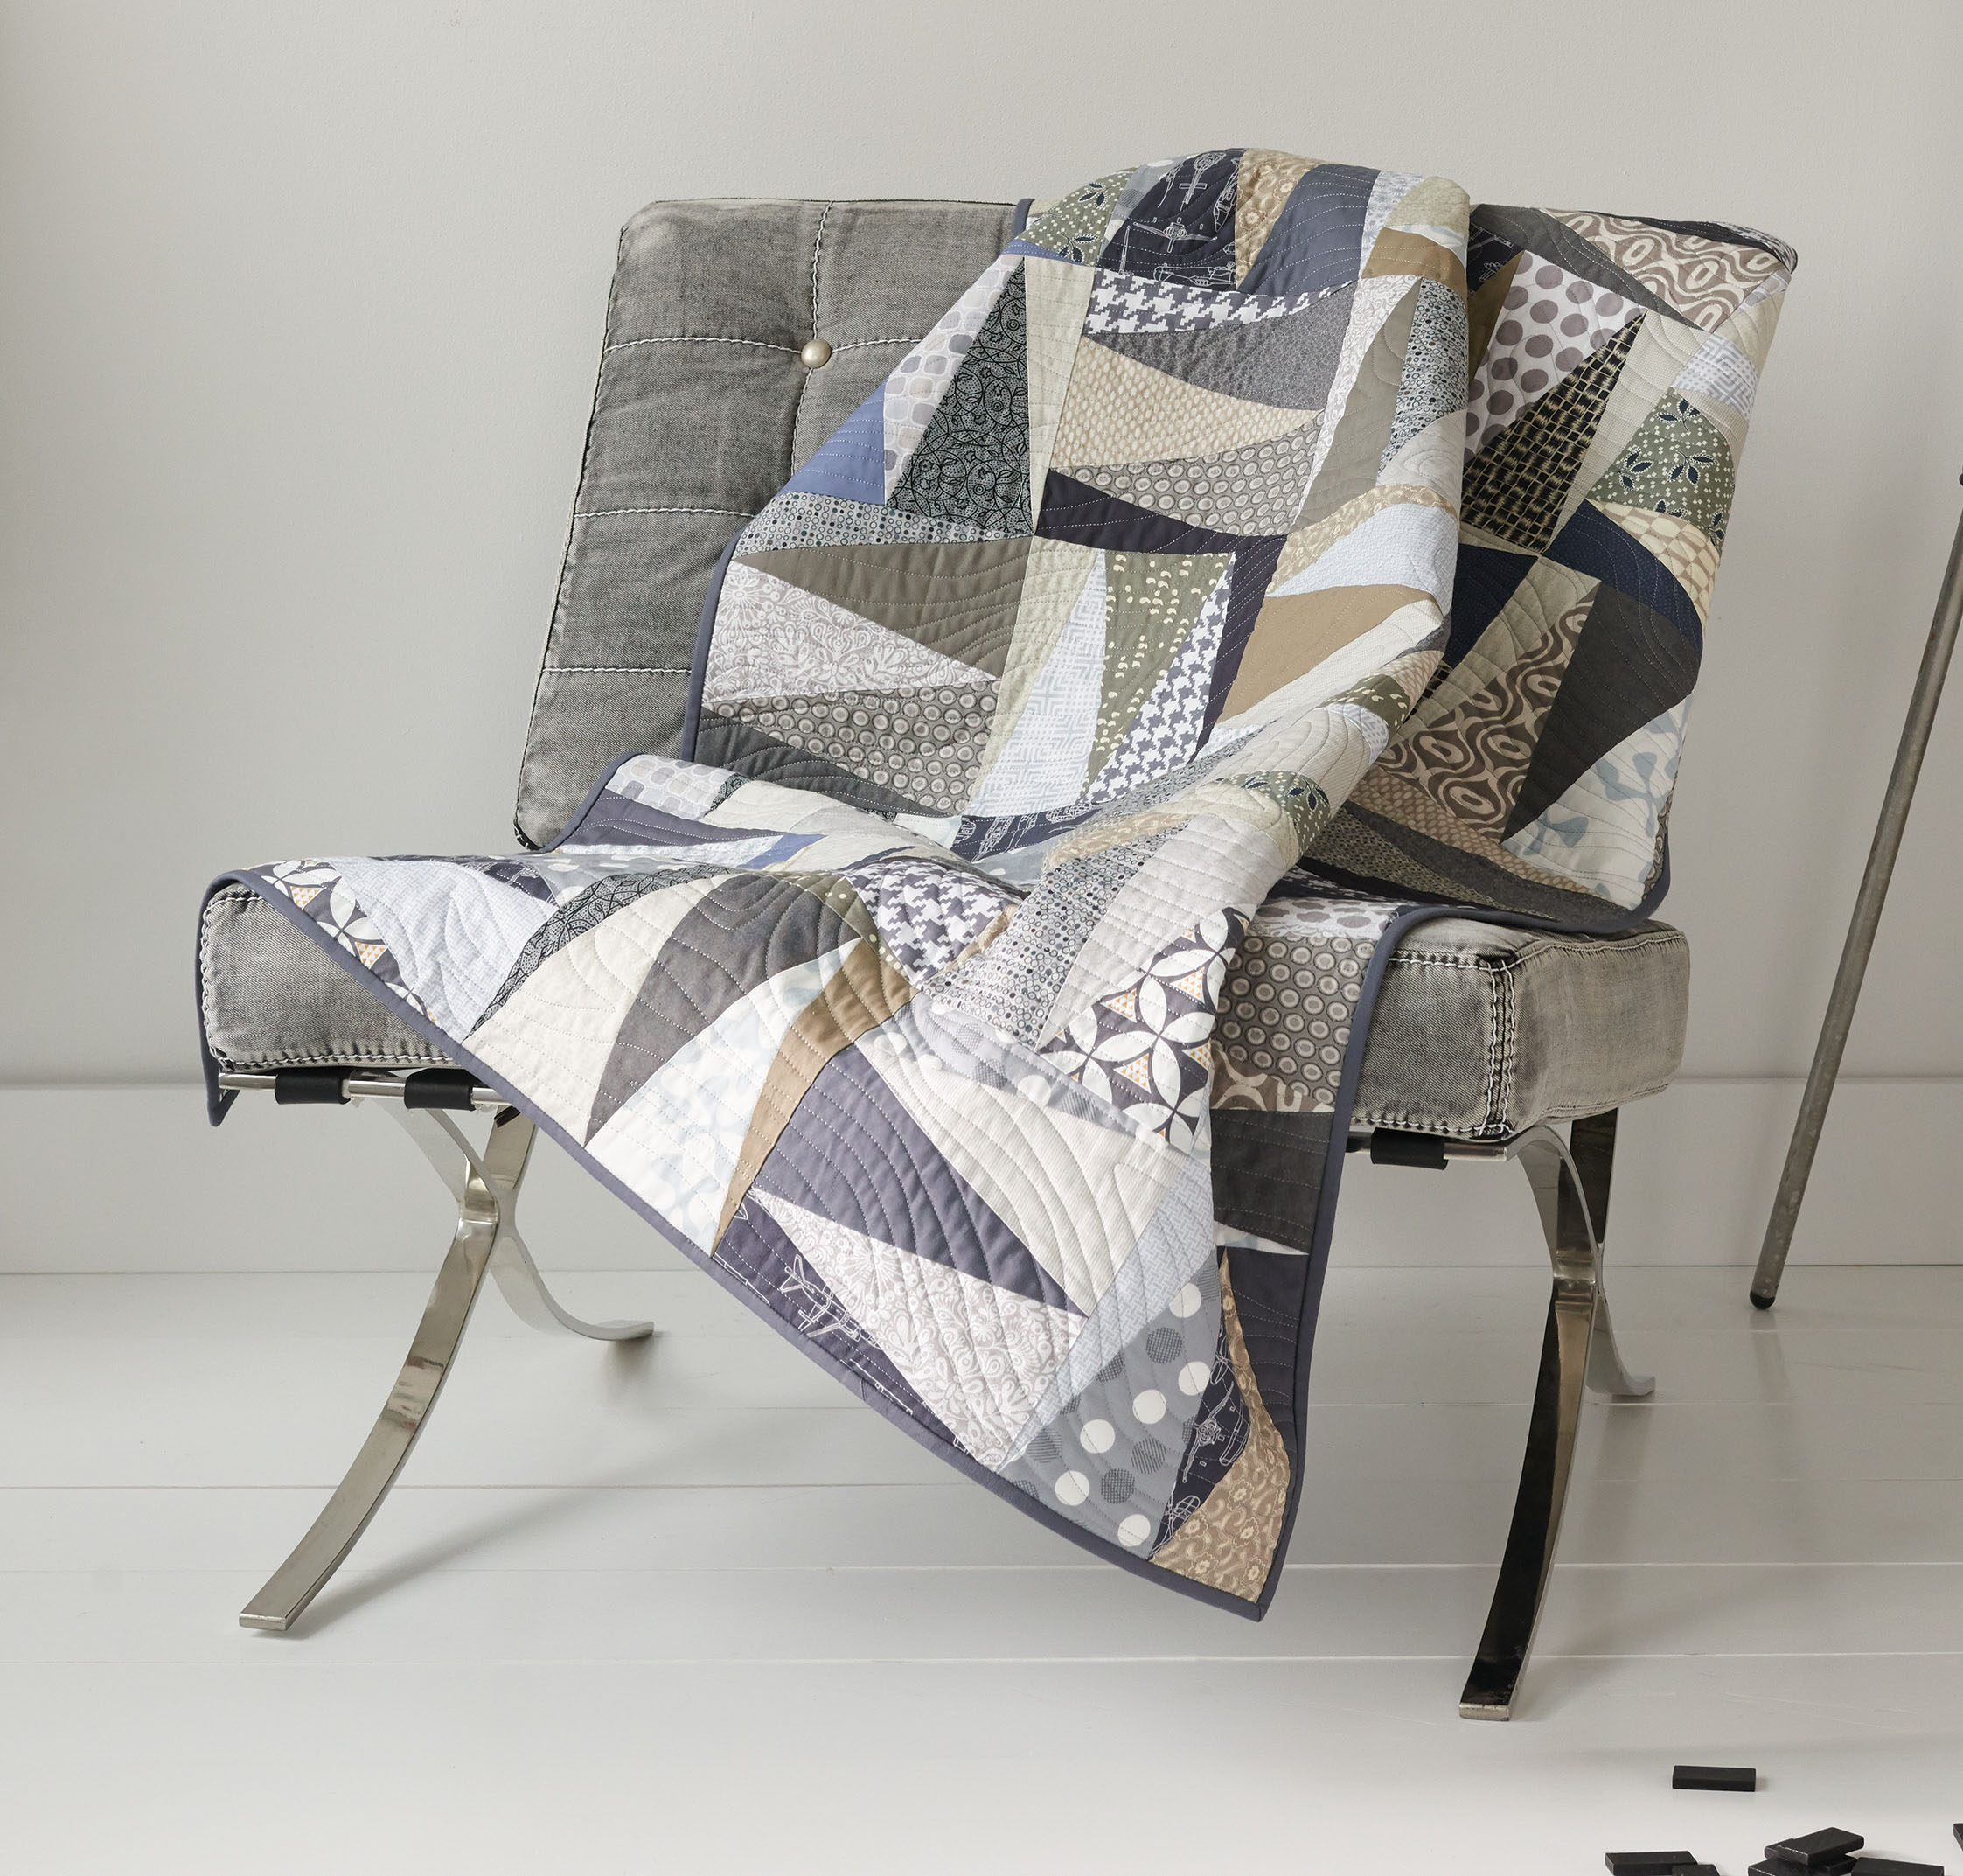 Doe een poging som Matroos Modern Patchwork Summer 2015 - Quilting Daily | Quilting Daily